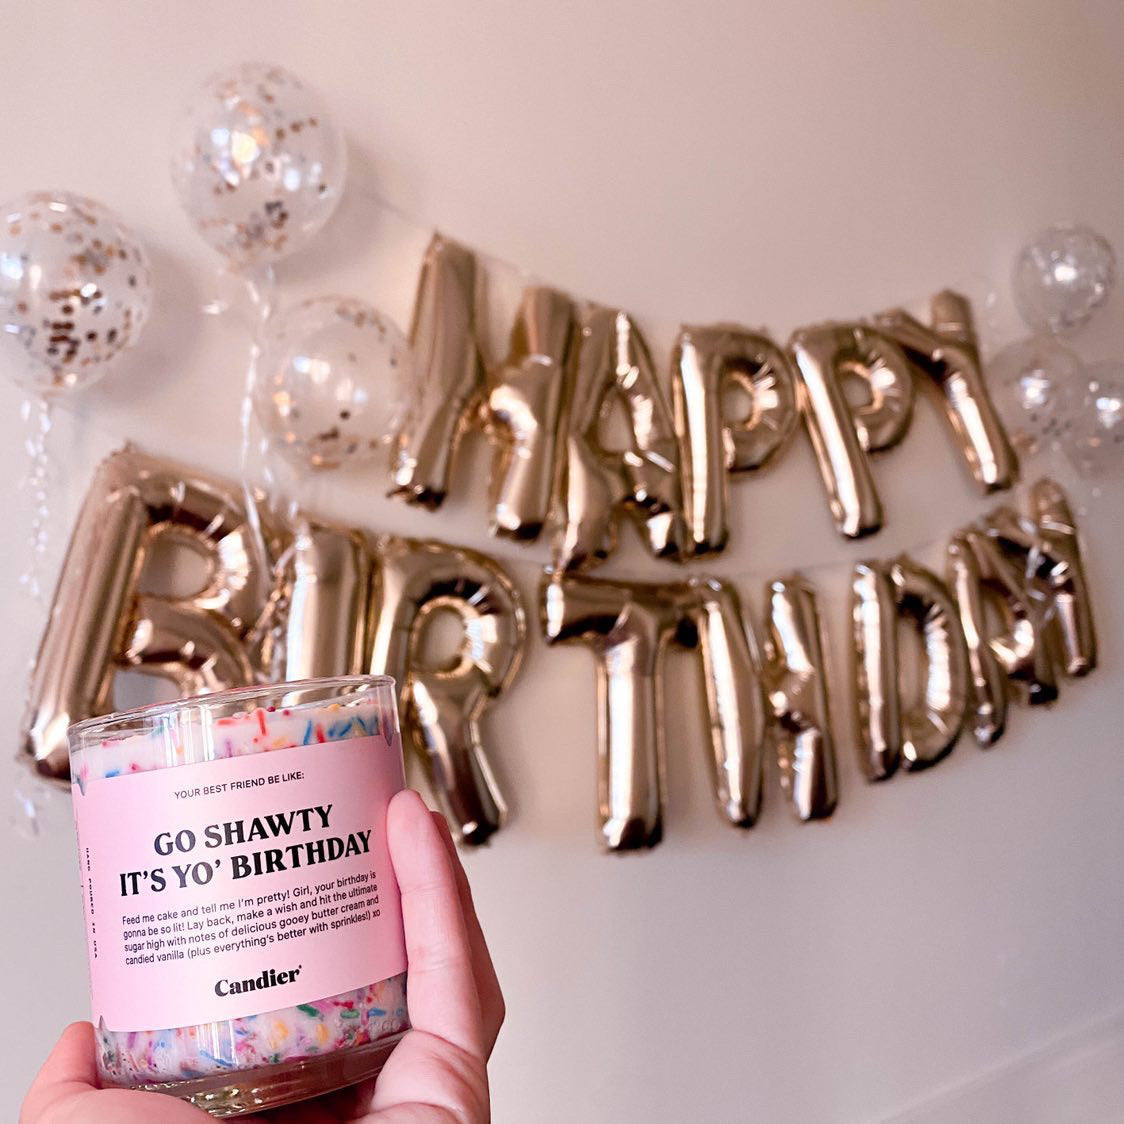 "Go Shawty It's Yo' Birthday" white candle with sprinkles by Candier held in front of a Happy Birthday sign